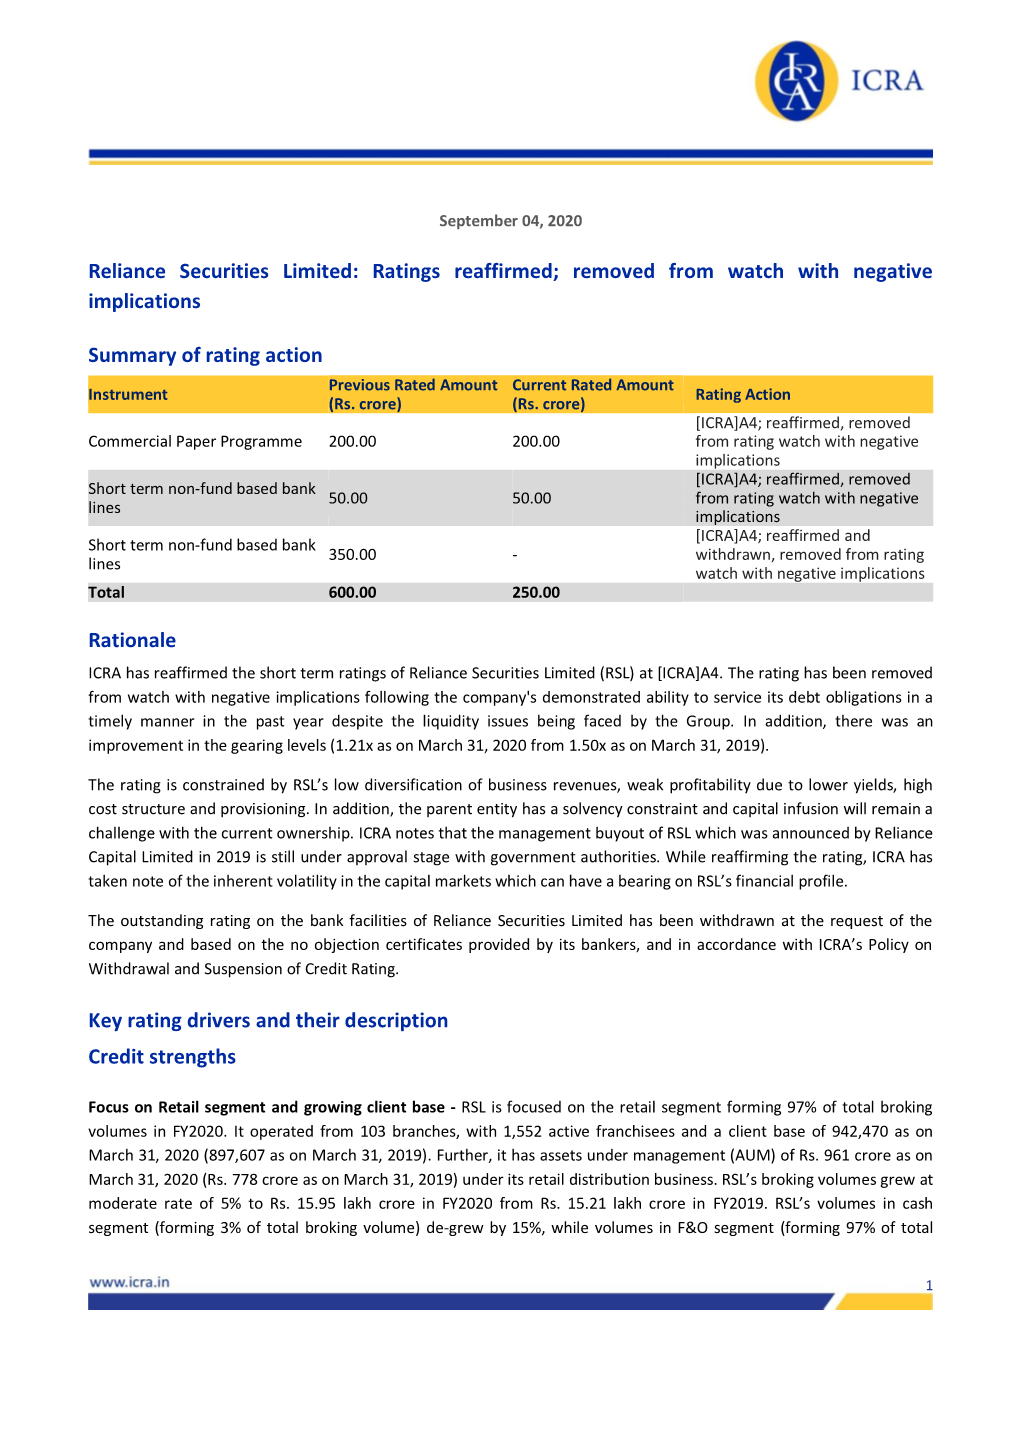 Reliance Securities Limited: Ratings Reaffirmed; Removed from Watch with Negative Implications